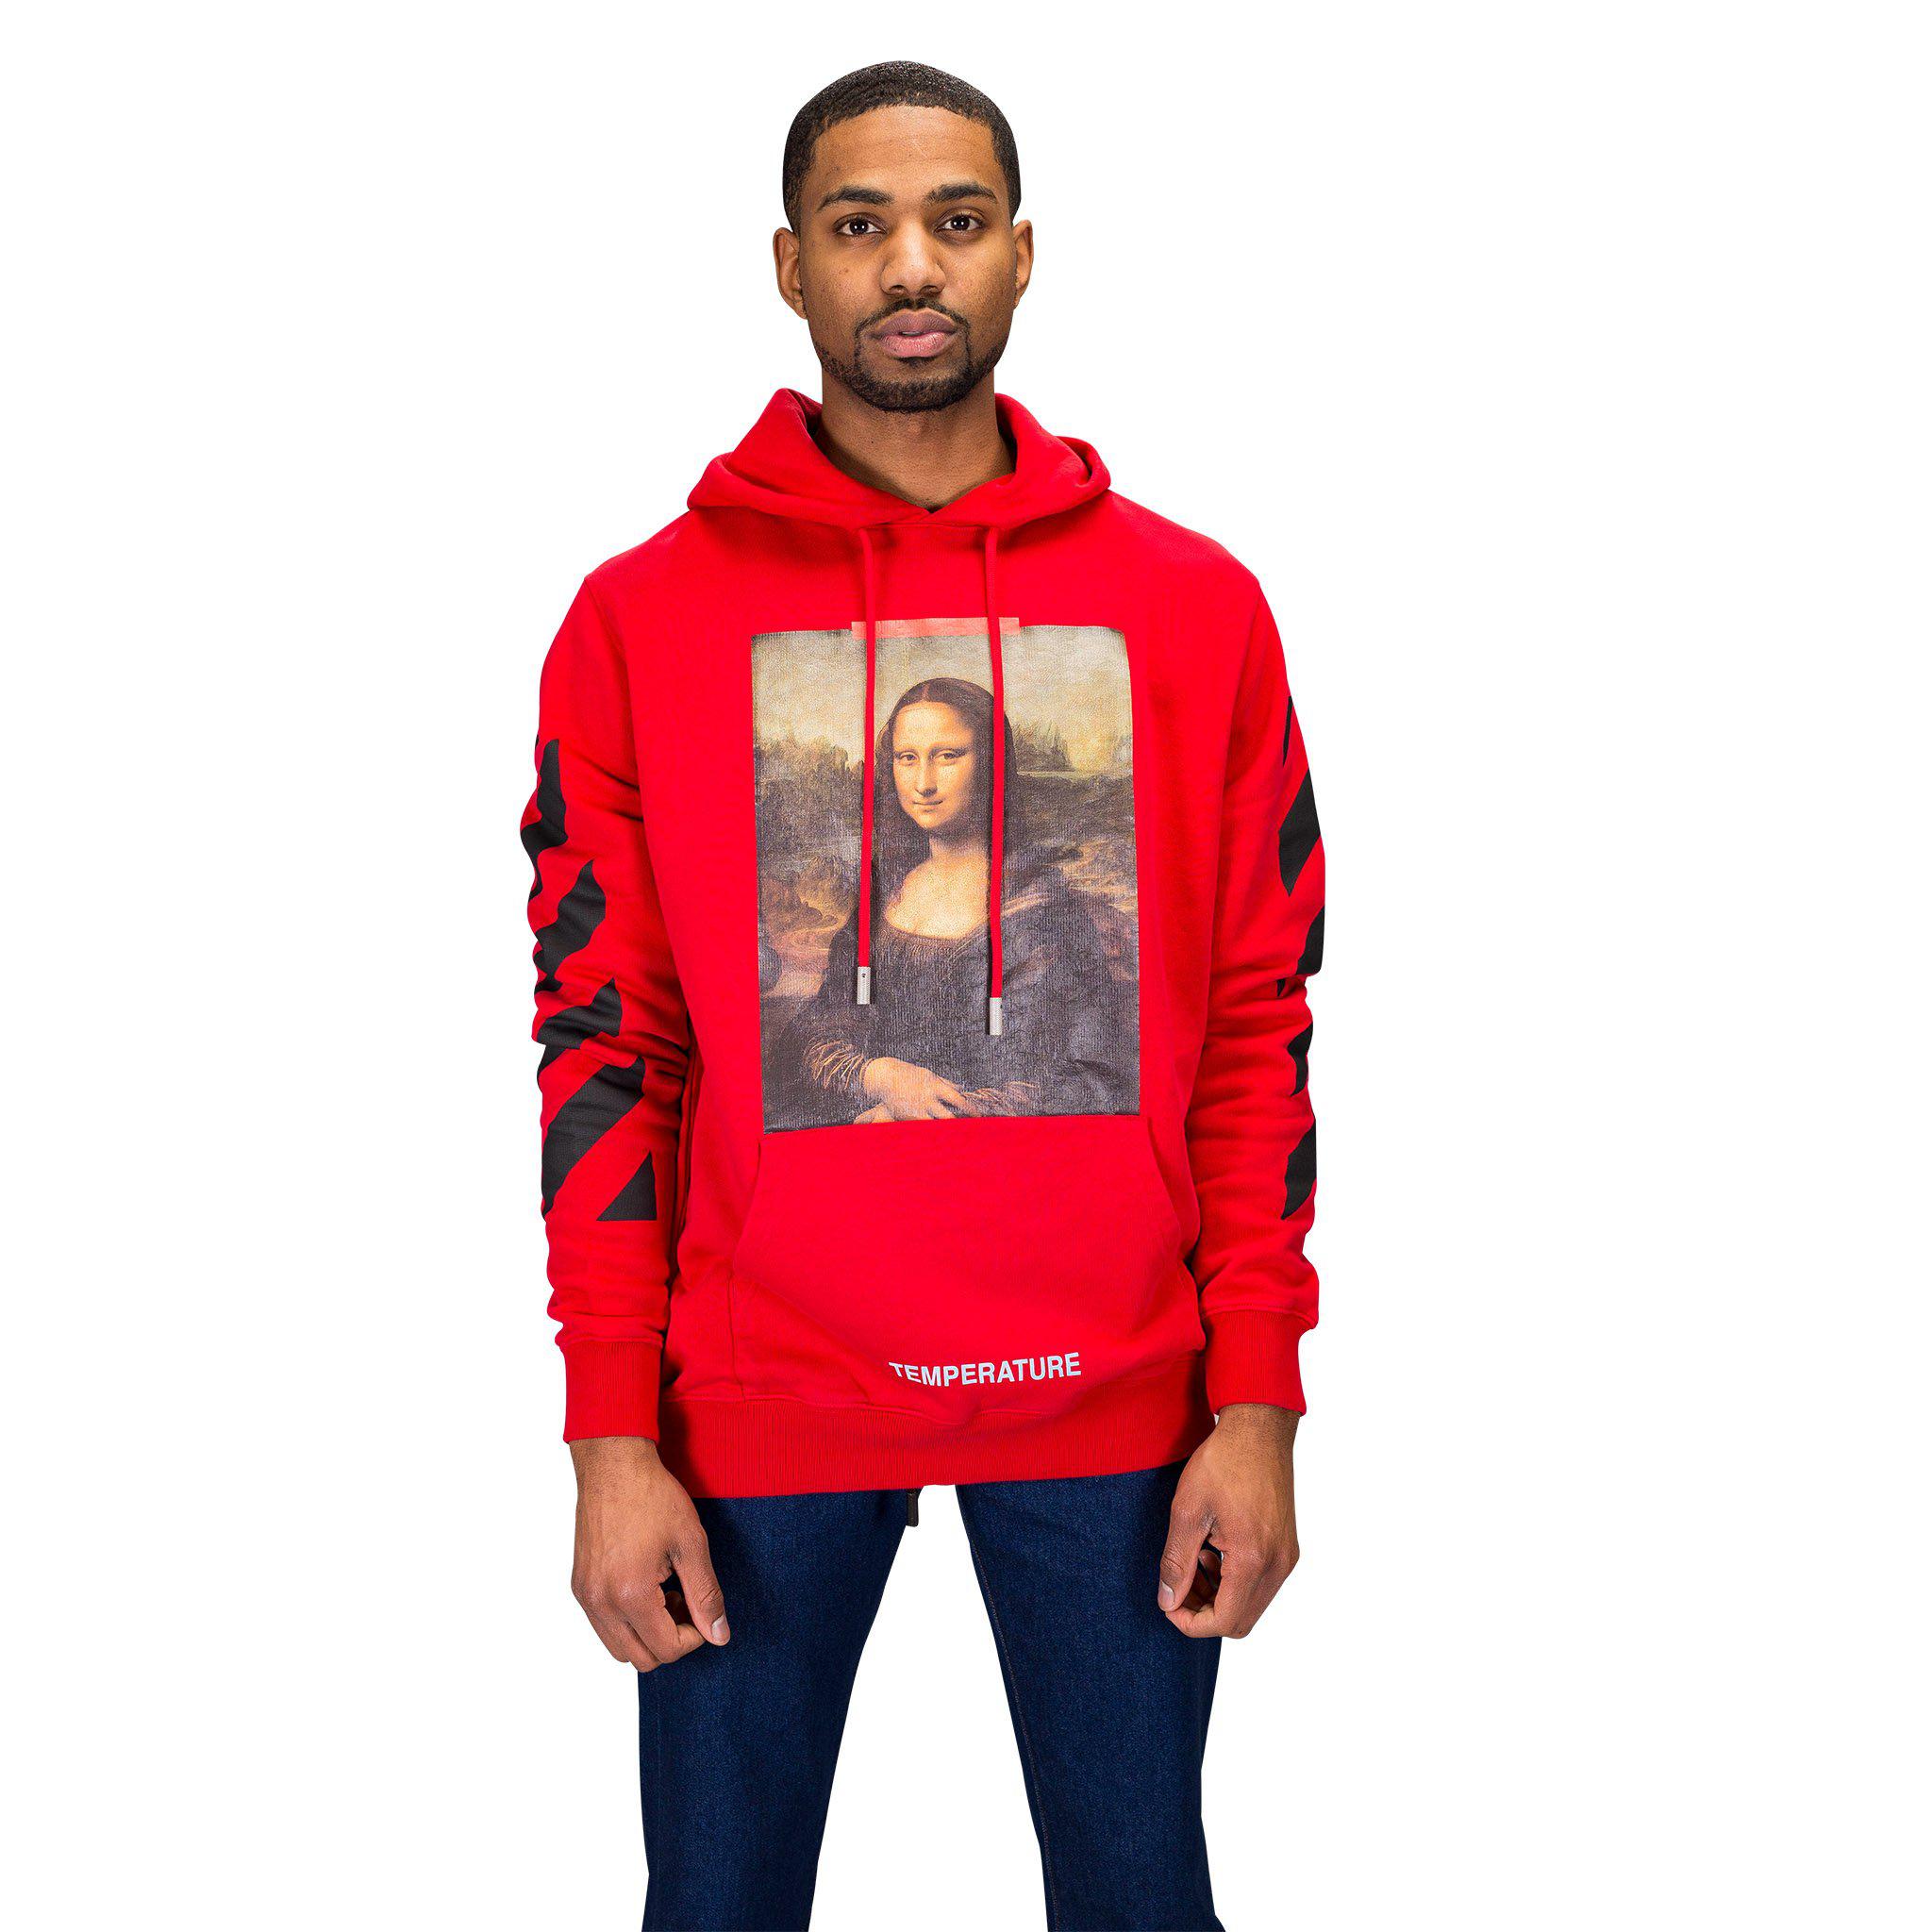 Mona Lisa Off White Hoodie Offer, 55% OFF, 46% OFF